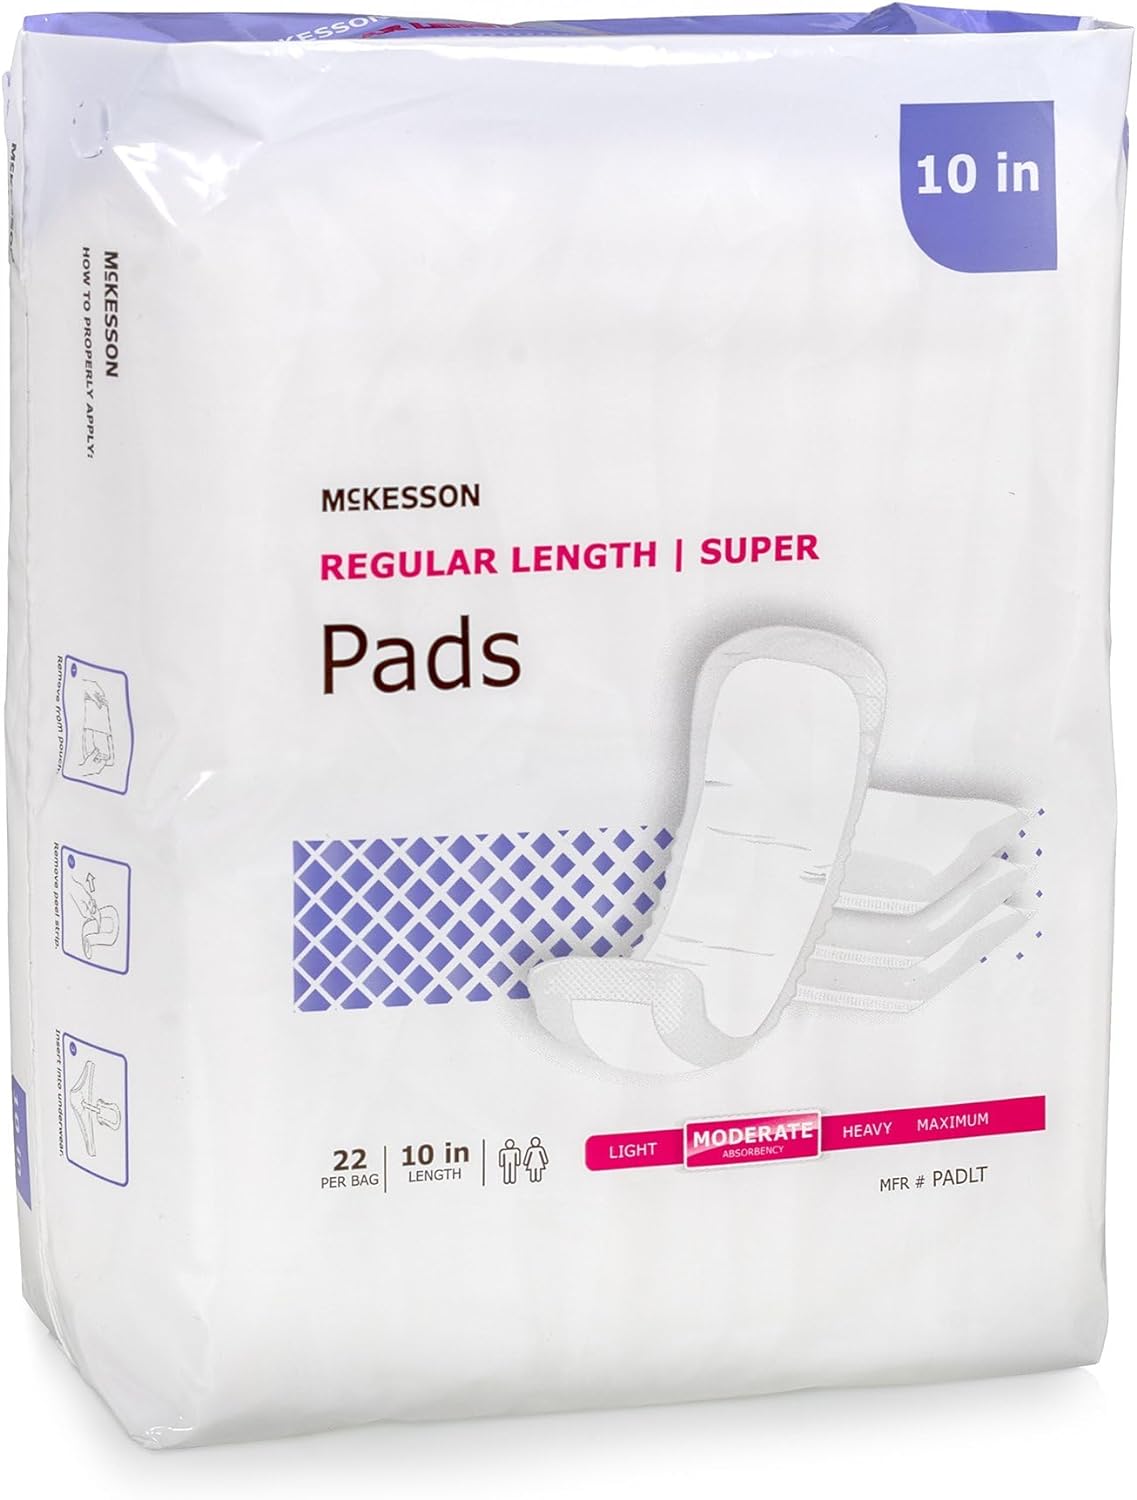 McKesson Super Pads for Women, Incontinence, Moderate Absorbency, 8 1/2 in, 22 Count, 1 Pack